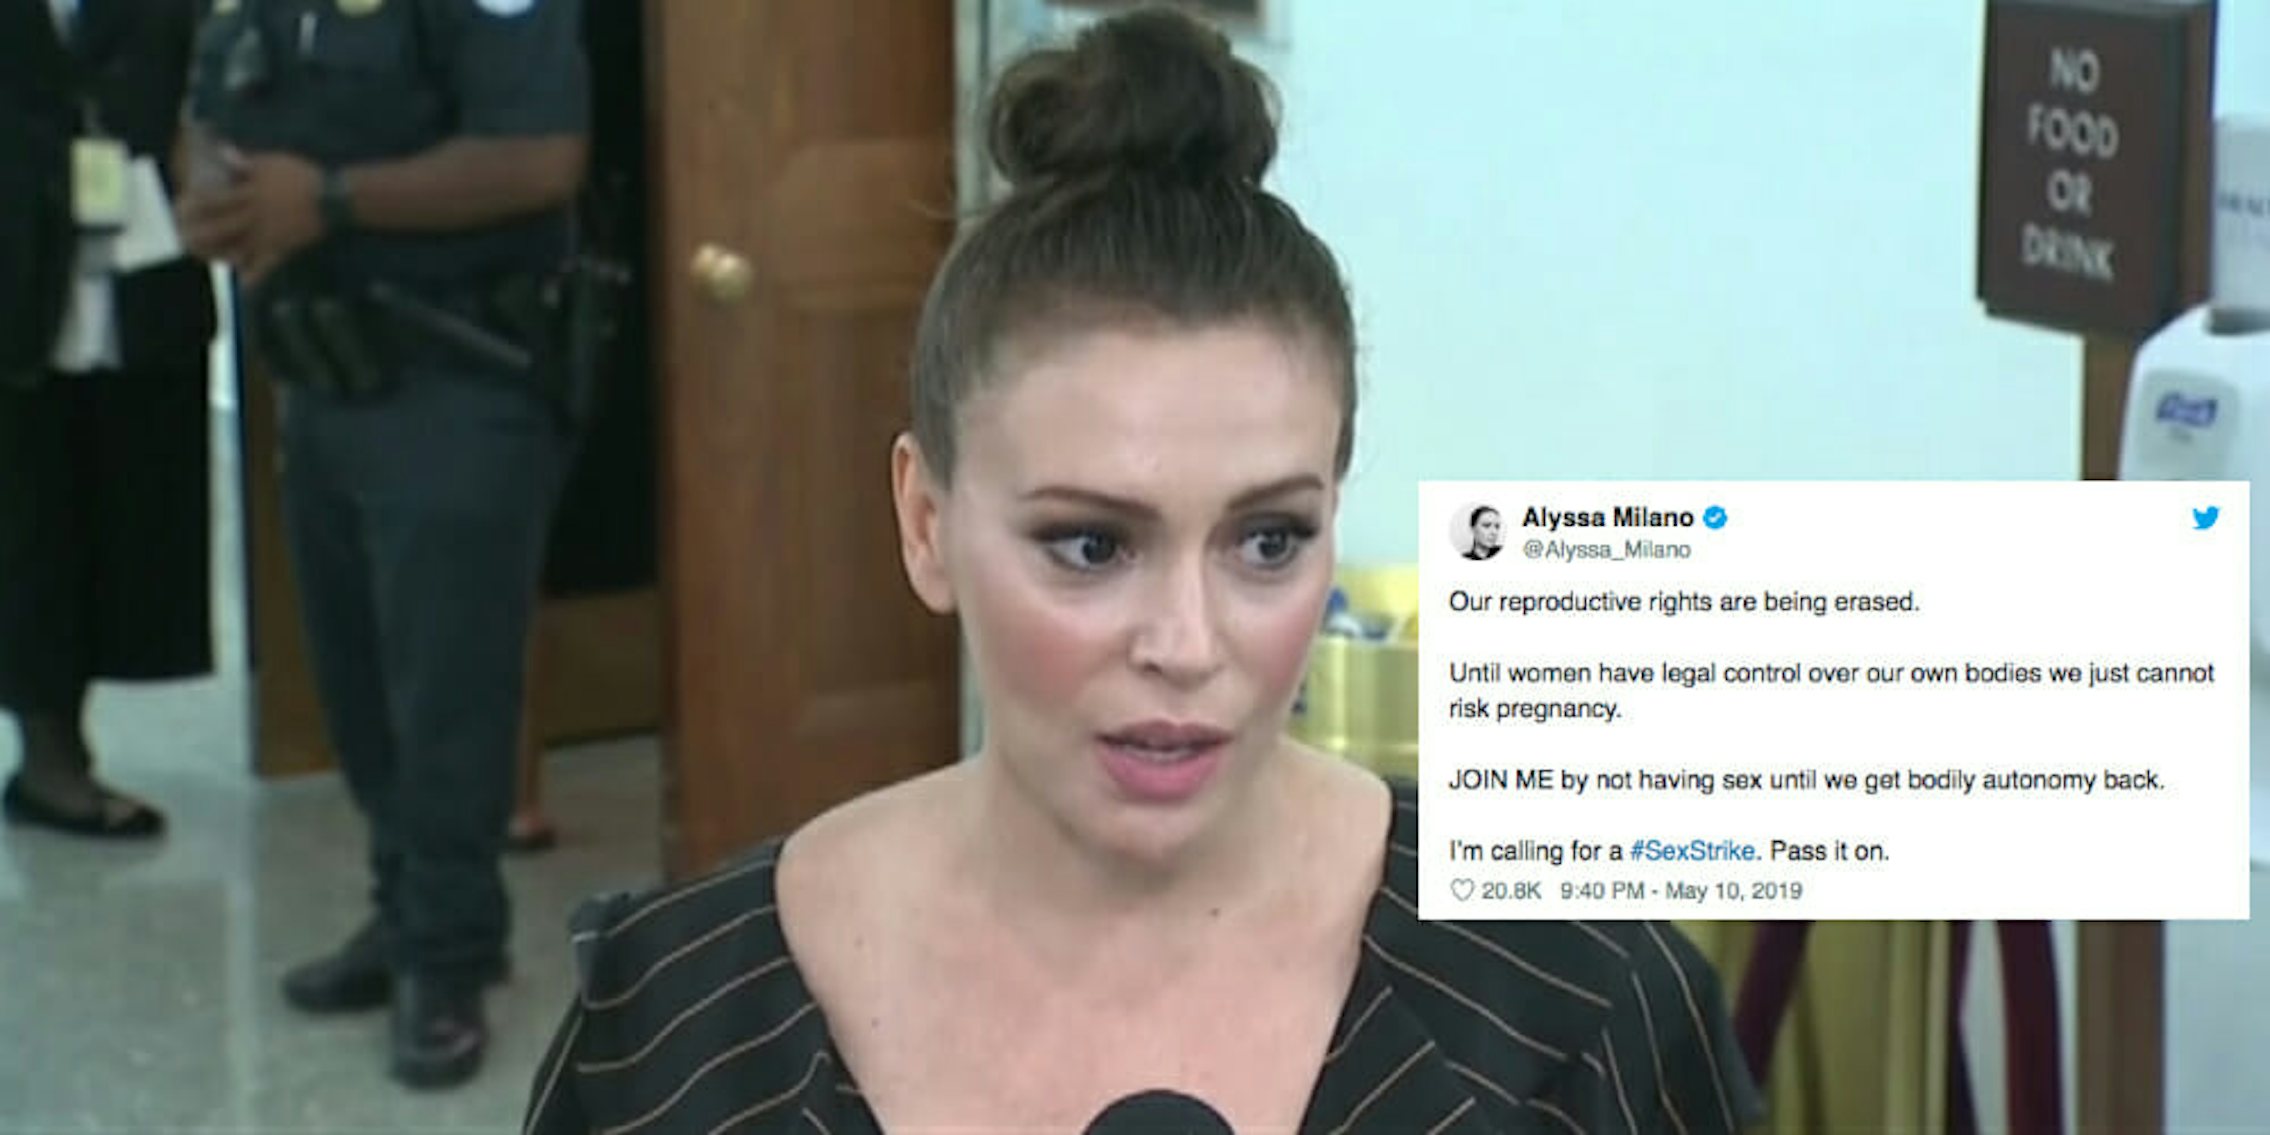 Pornstar Alyssa Milano - Women Are Promoting a #SexStrike on Twitter For Women's Rights